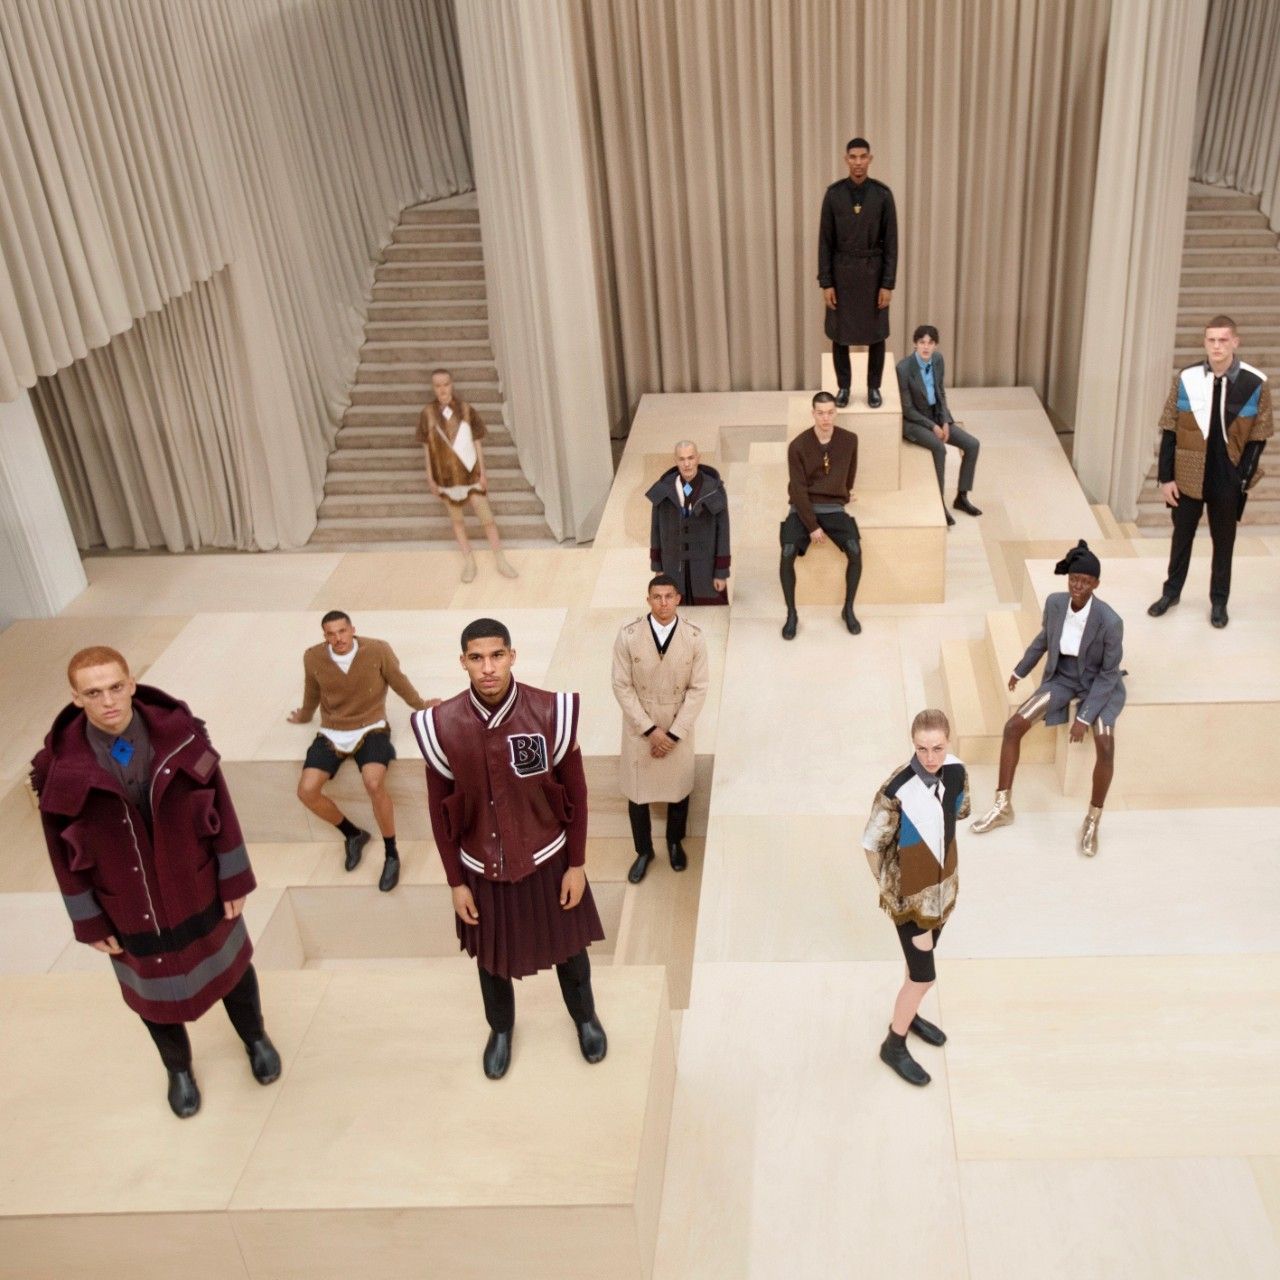 Every Look from Fall/Winter 2021 Menswear Collection - Burberry Riccardo Tisci Fashion Week